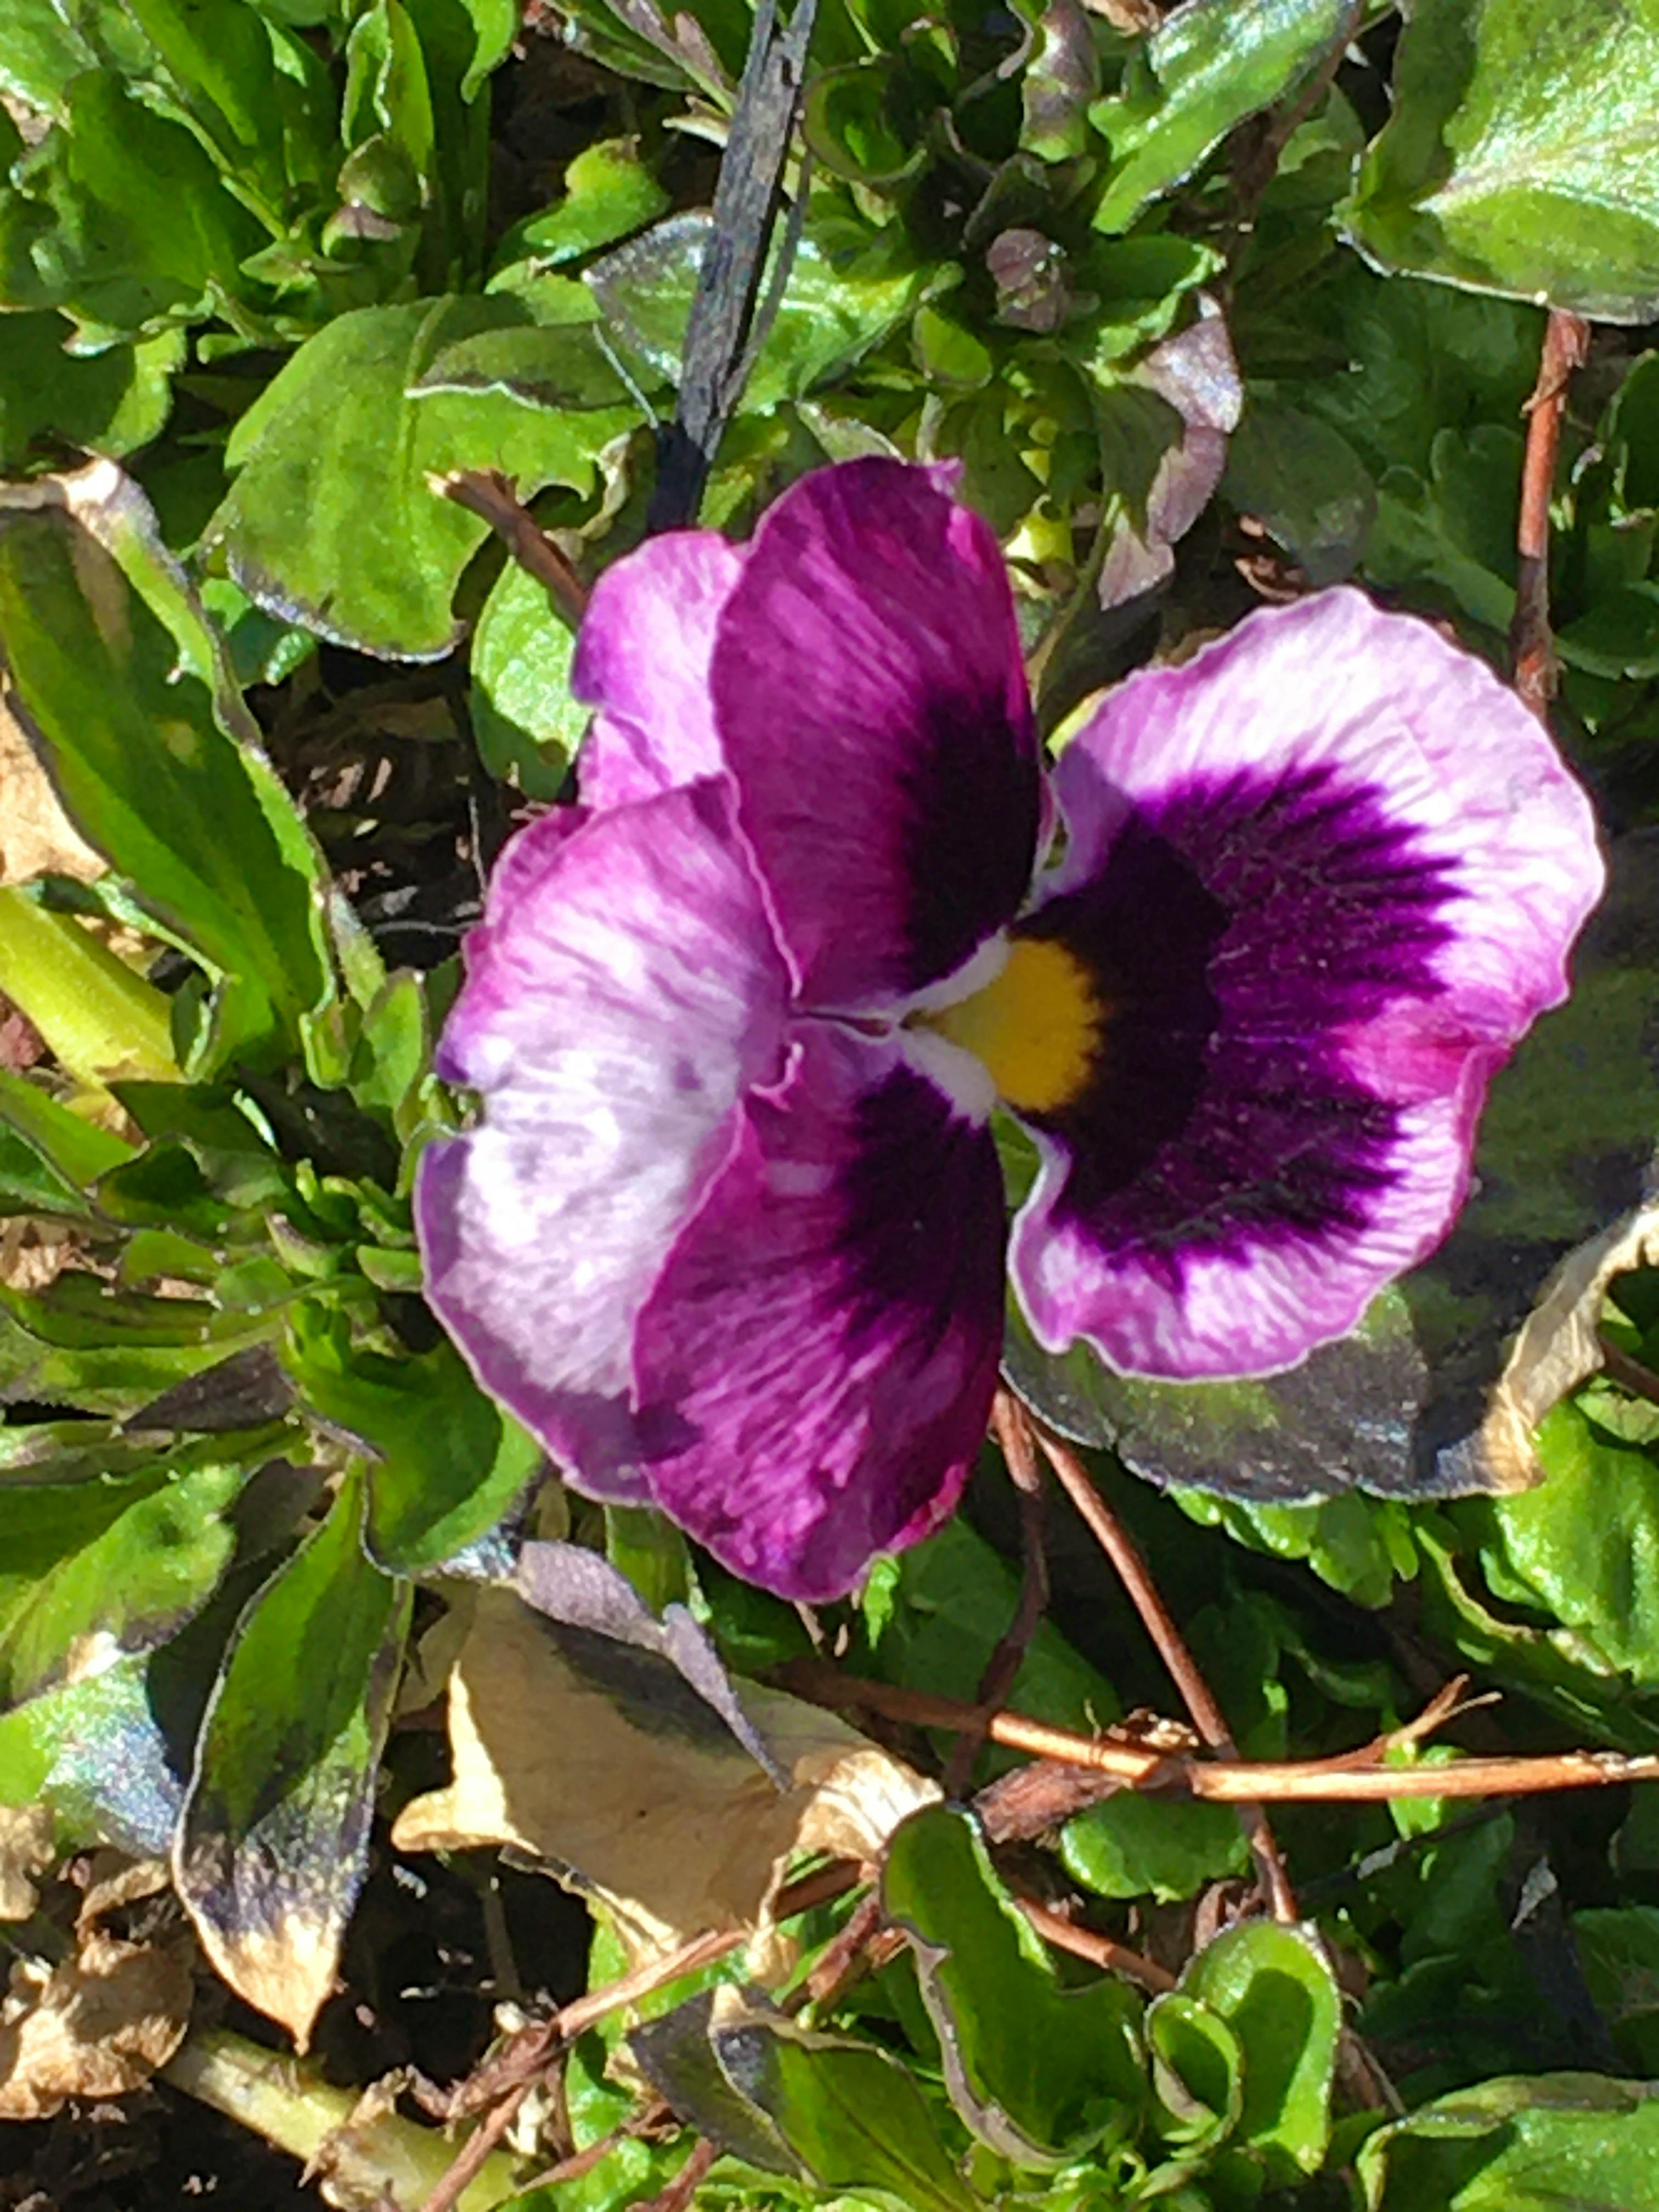 Tuesday's sunshine drew Judy to her garden and while she fiddled around in her beds, she came across this delicate pansy.  Judy Lowe planted the pansy last spring and was so pleased to see that it survived the harsh winter on Prince Edward Island. Nature and people are resilient.  Before long, our gardens will be in full-bloom again; we just sunshine and love.